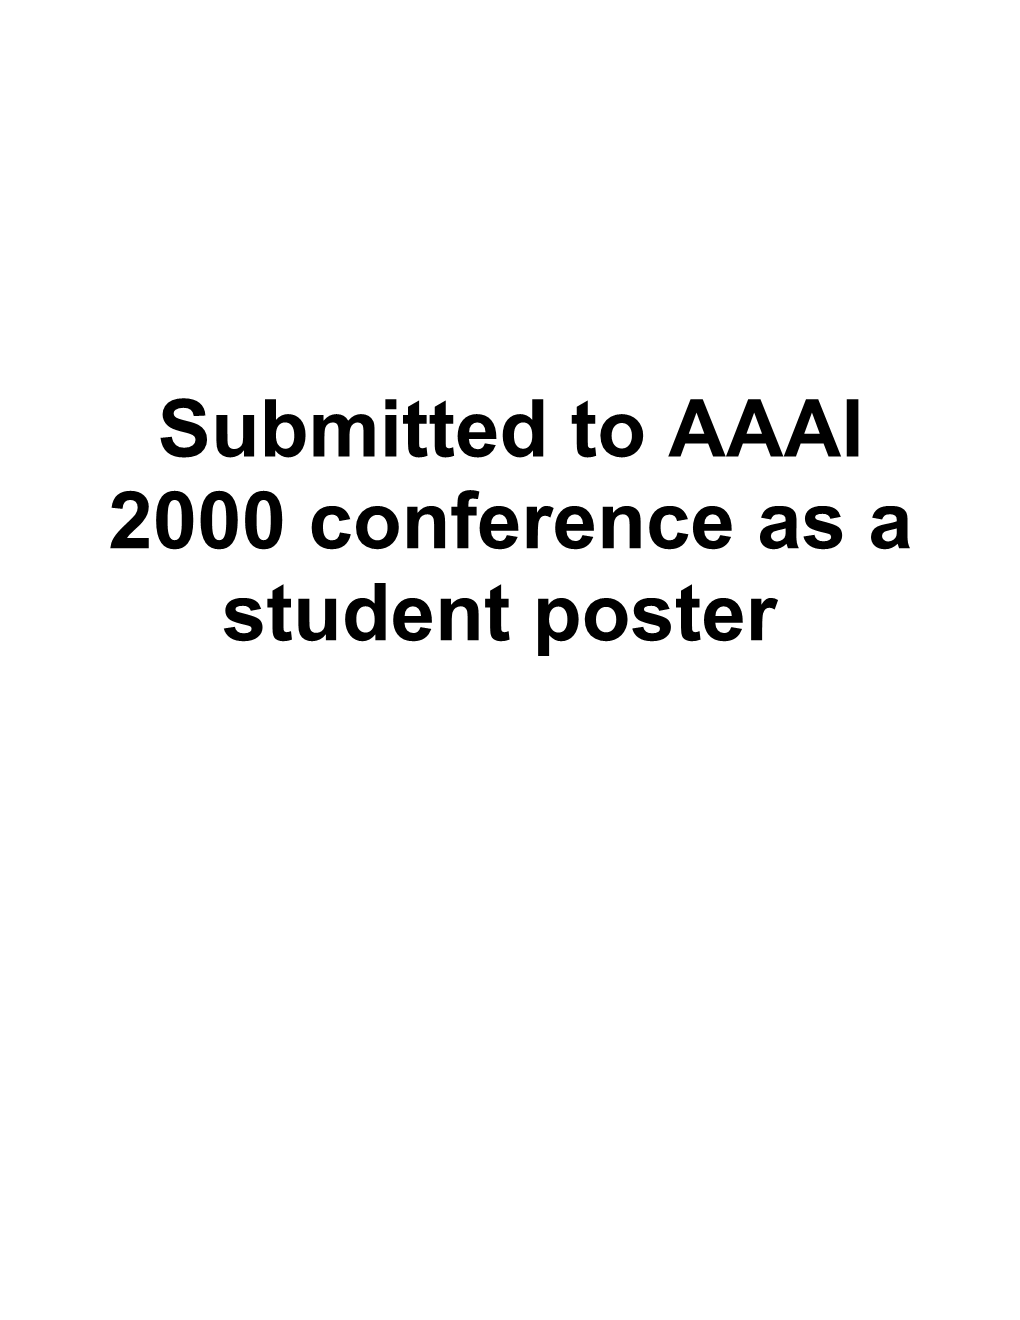 Submitted to AAAI 2000 Conference As a Student Poster